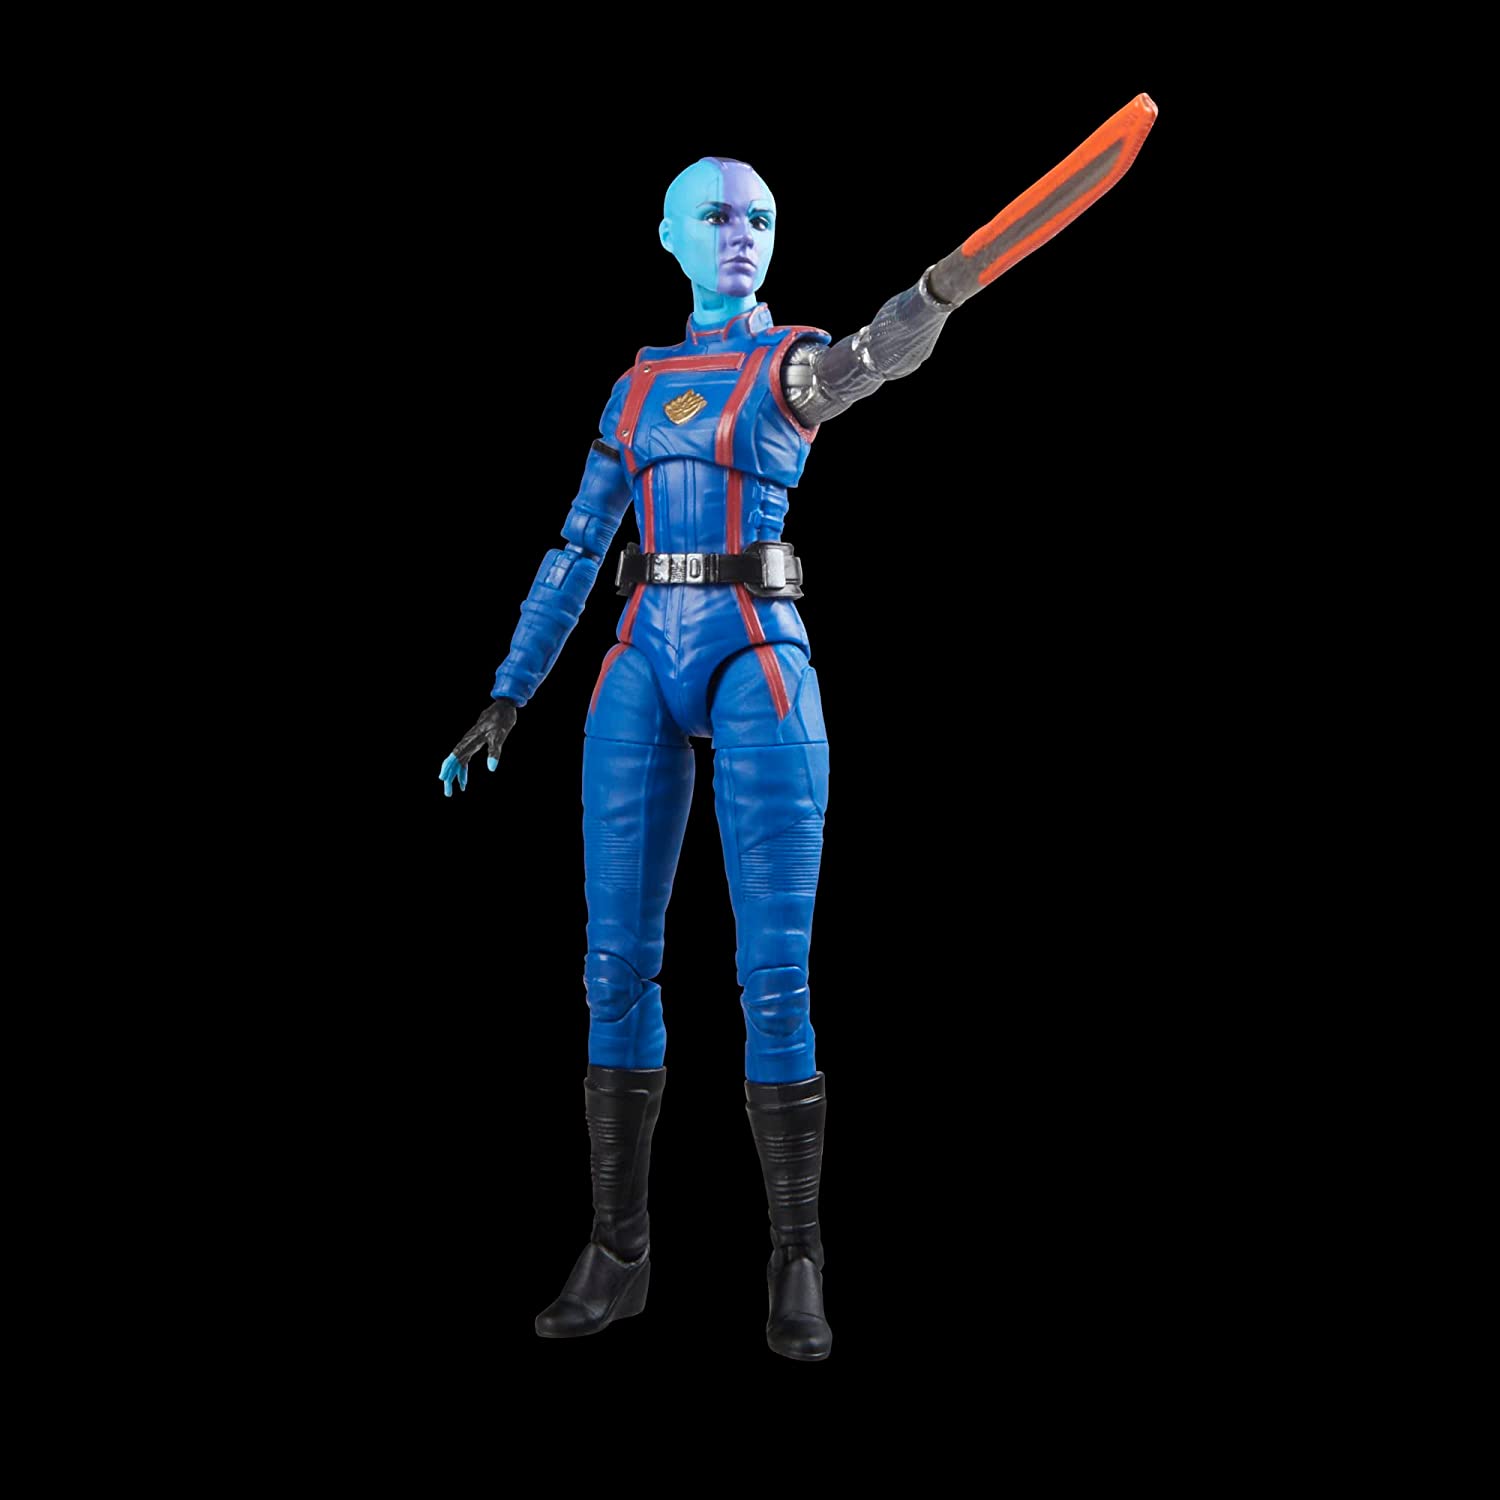  Guardians of the Galaxy Vol. 3 Marvel Legends Nebula 6-Inch Action Figure Toy